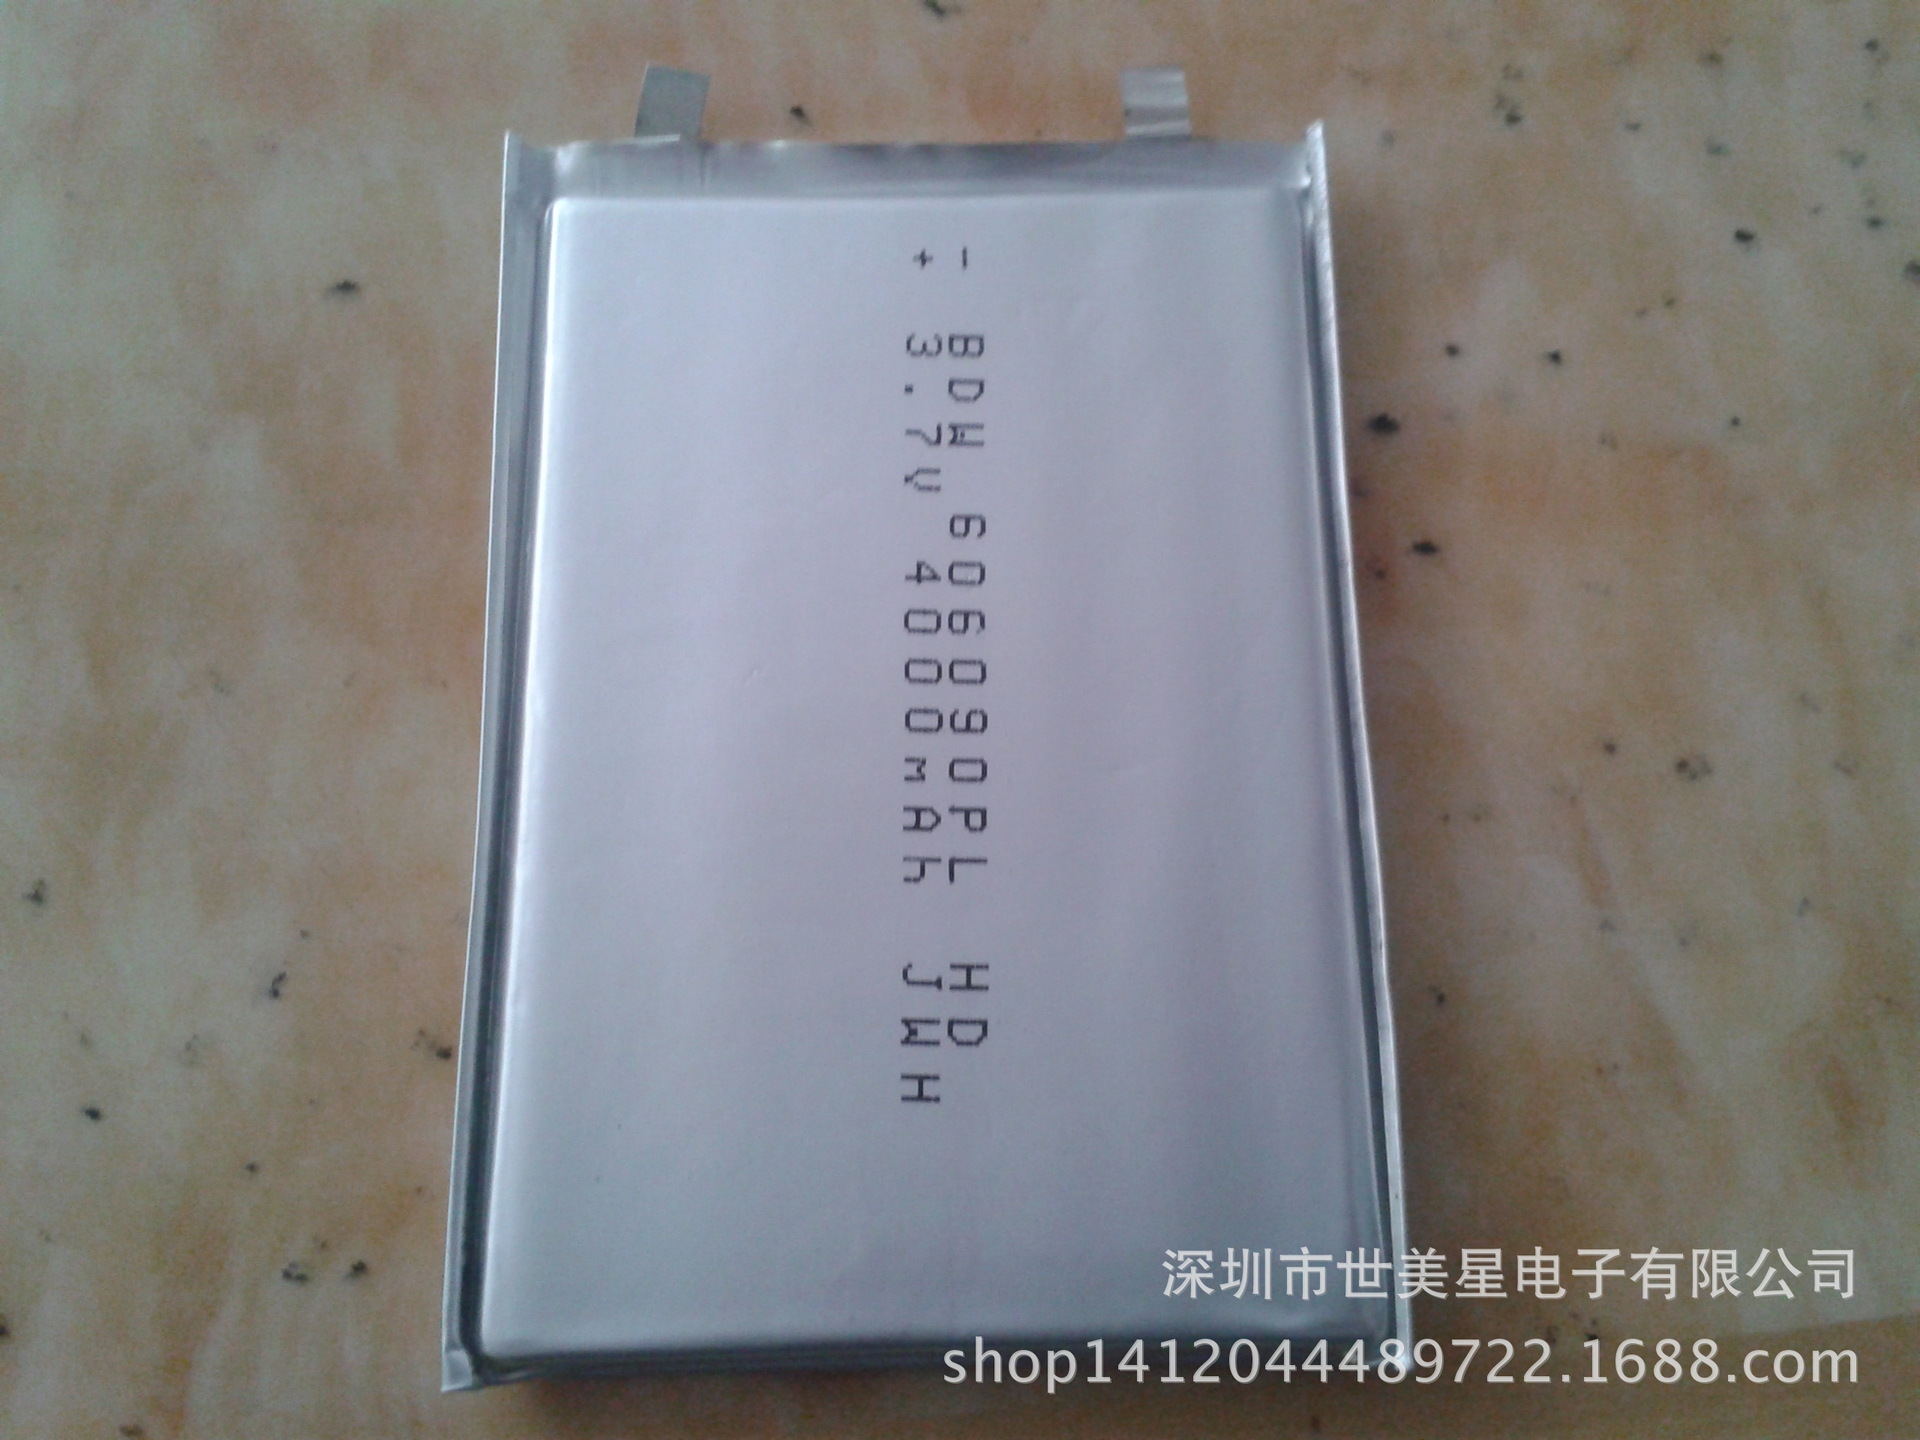 Manufacturer's direct sales tablet computer 3479130 3480108 606090 4959123 polymer lithium battery c